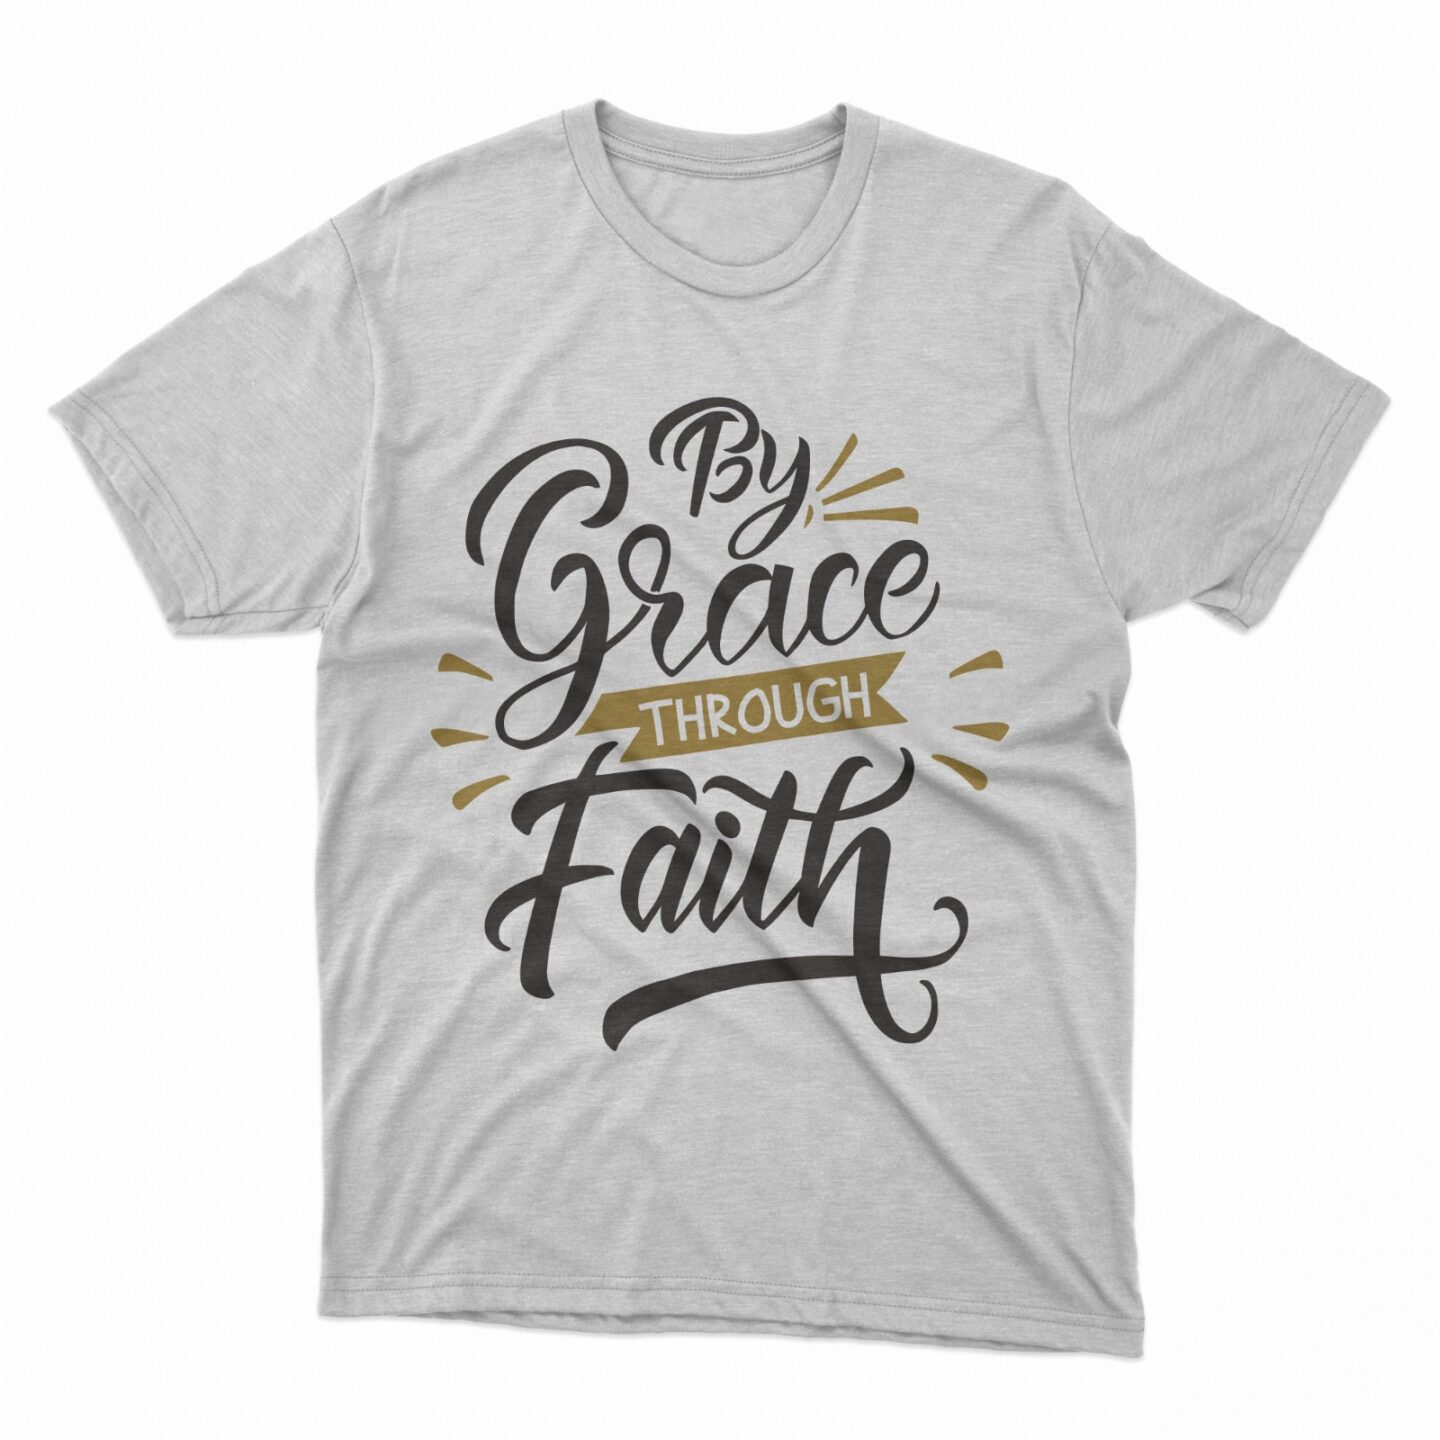 By grace through faith- 3 positive affirmations for the new year